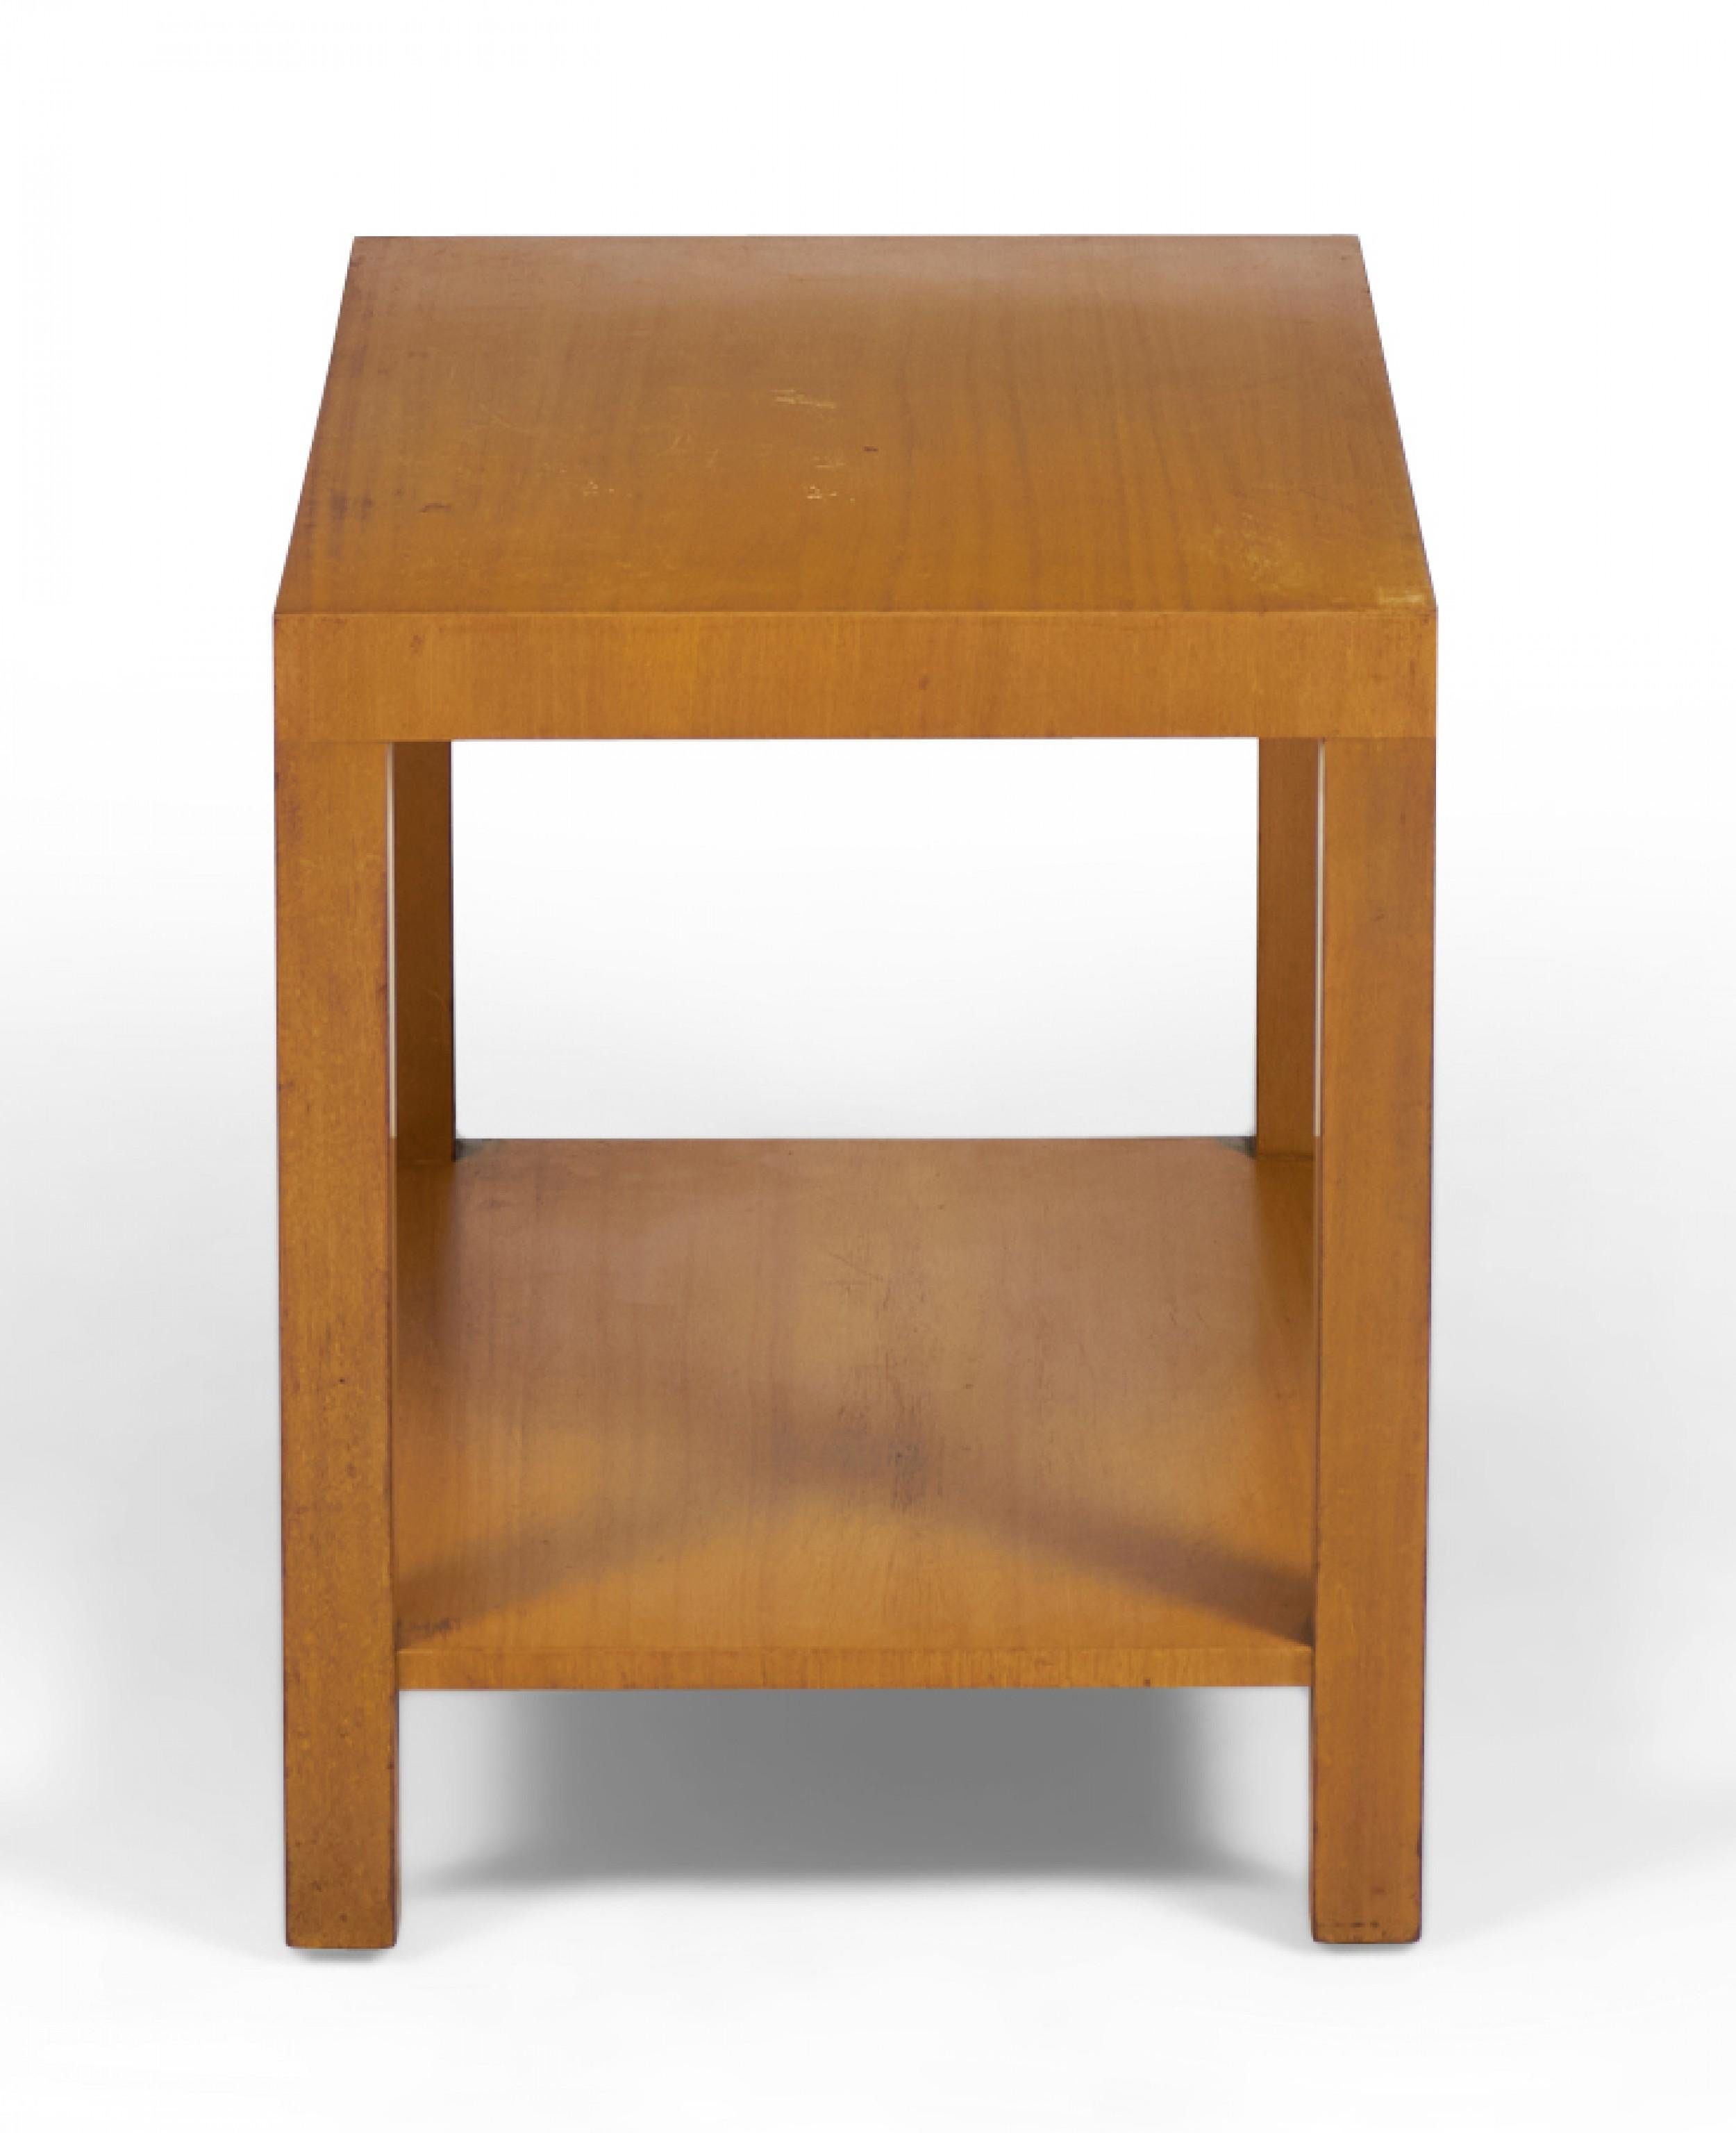 Pair of Widdicomb Modern American Mid-Century Parsons Style Wooden End Tables For Sale 2